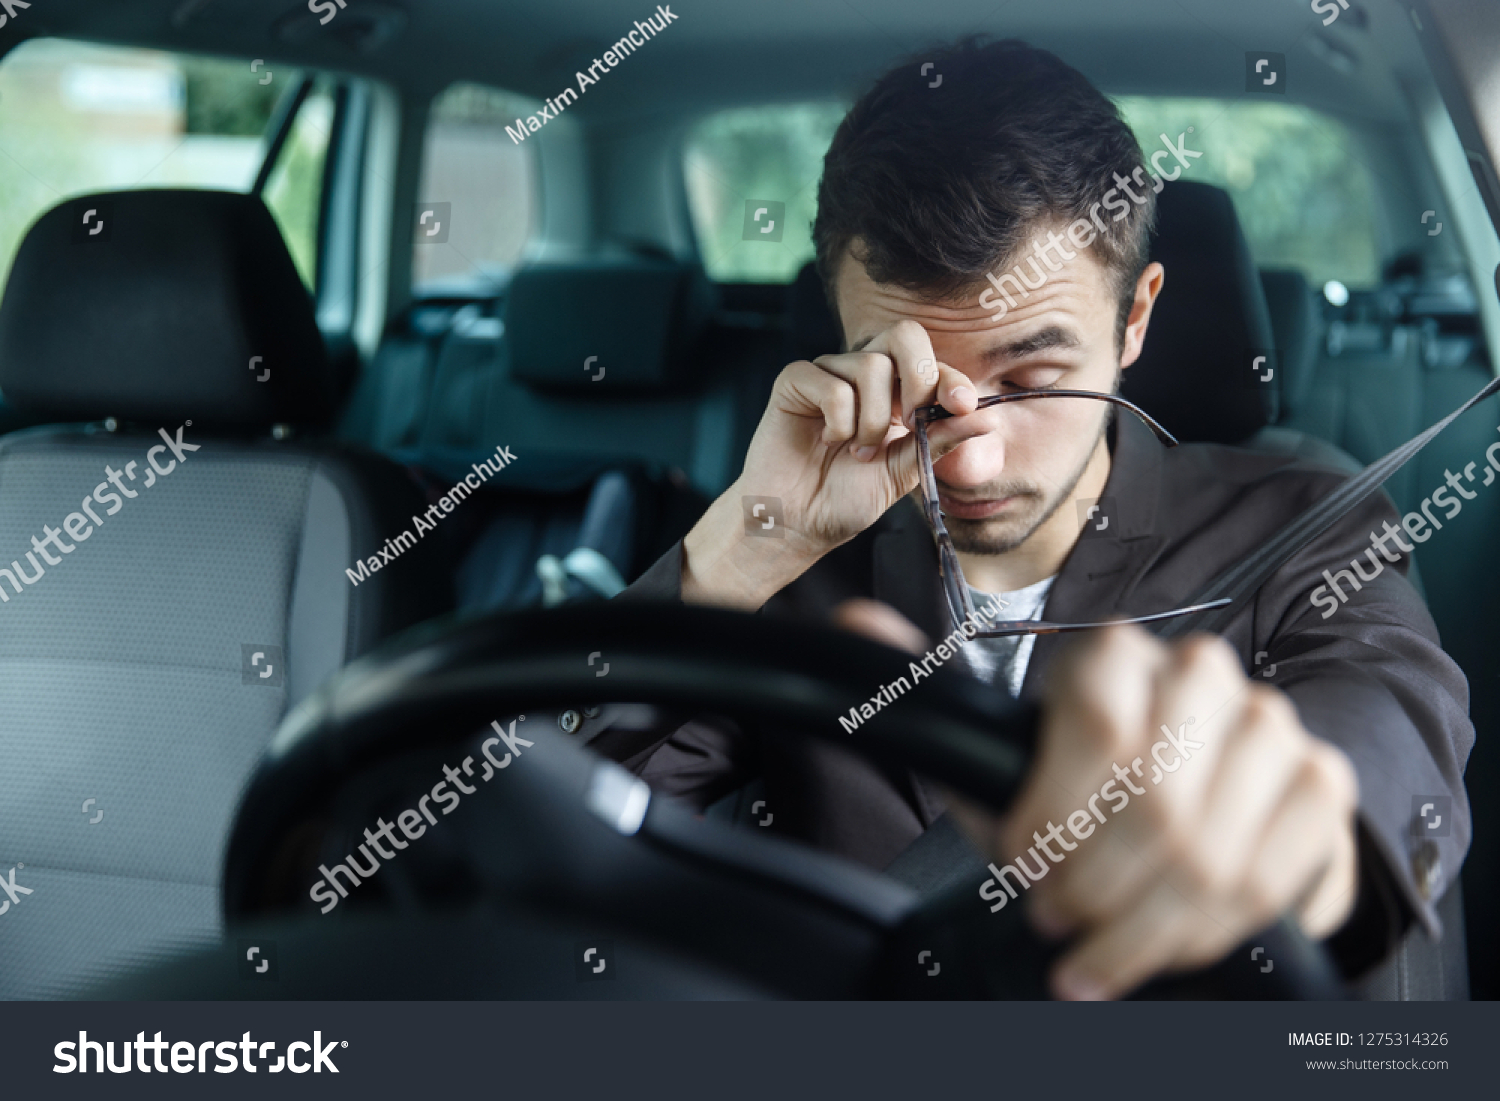 Sleepy young man rubs his eyes with his right hand. His left hand is on the steering wheel. He is sitting at his car. Road safety concept. #1275314326